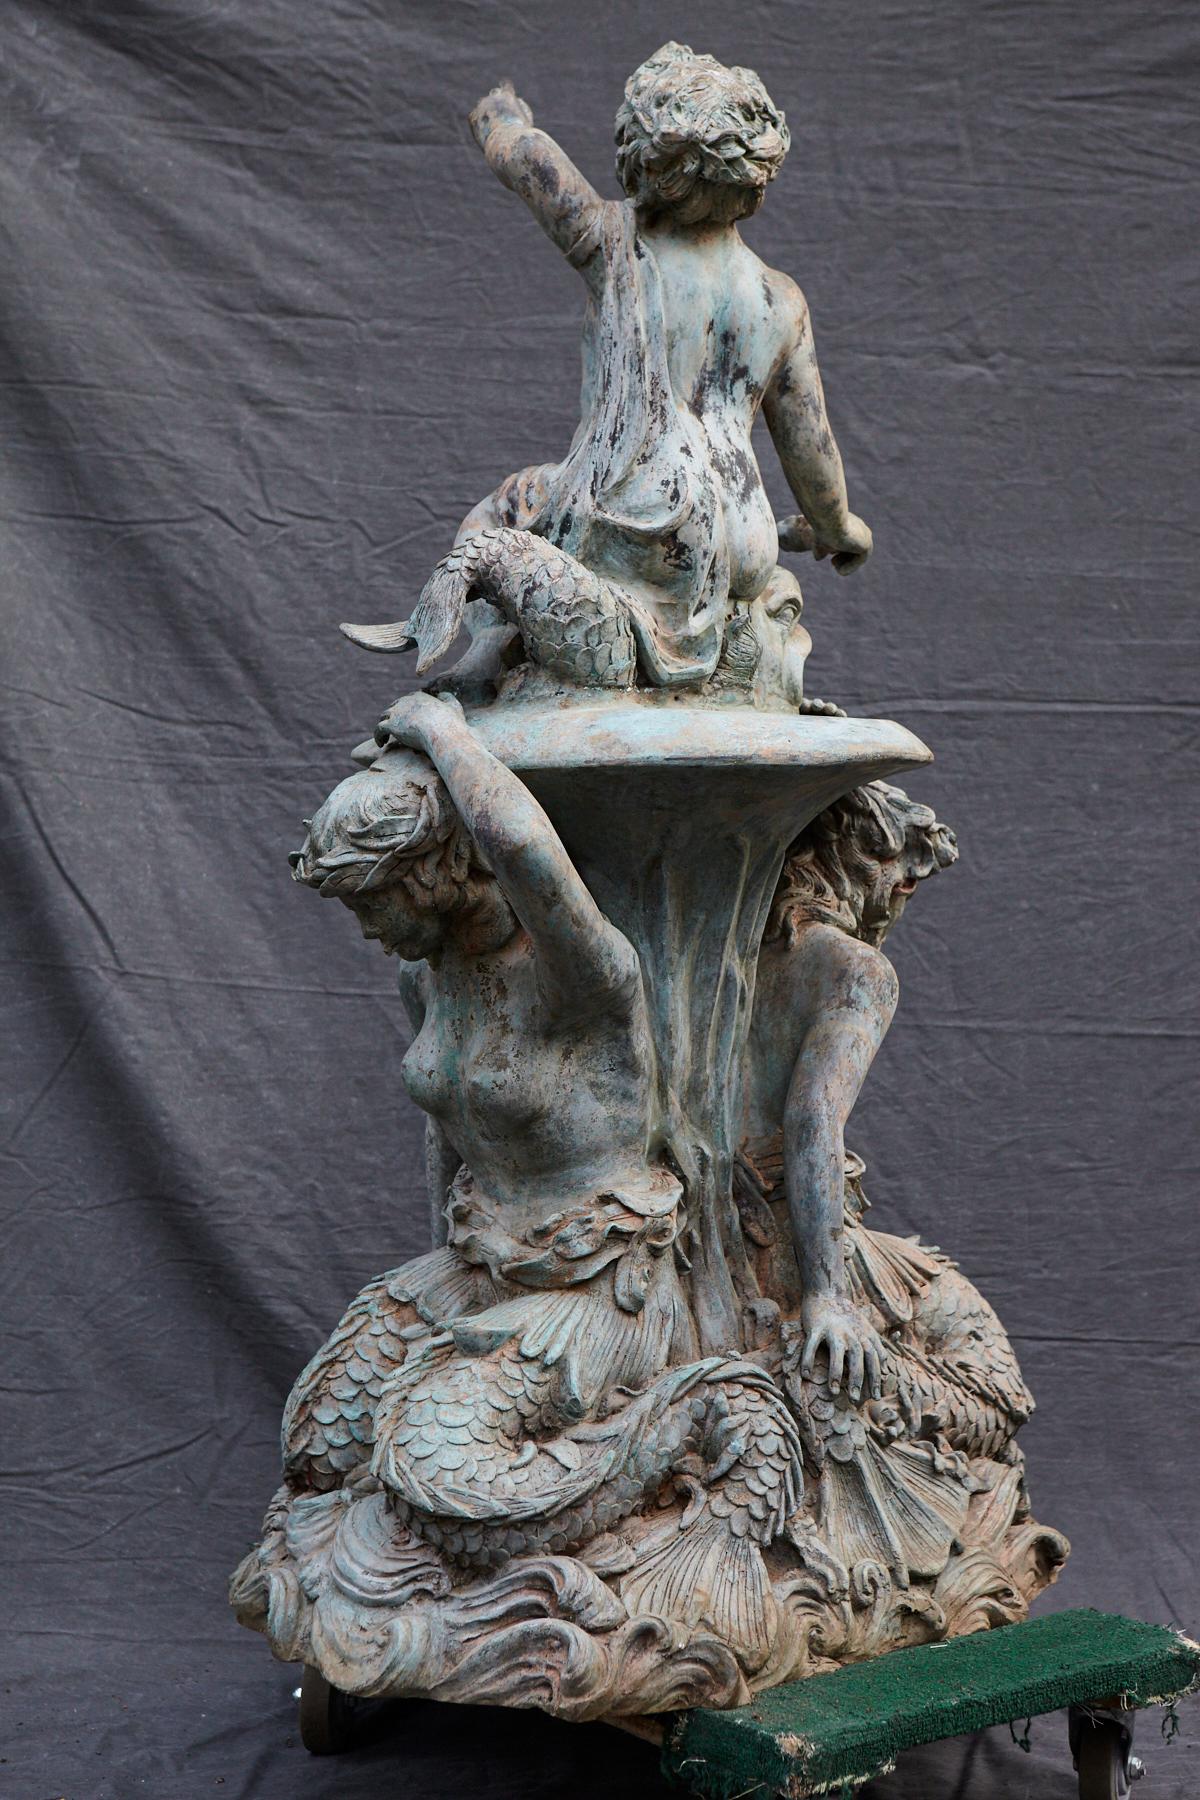 Bronze water garden/fountain statue of a merman and a mermaid carrying a merboy and a dolphin on their shoulders. The statue has a wonderful, lovely green patina. The statue is piped.
Additional photos can be provided on request, as the space is